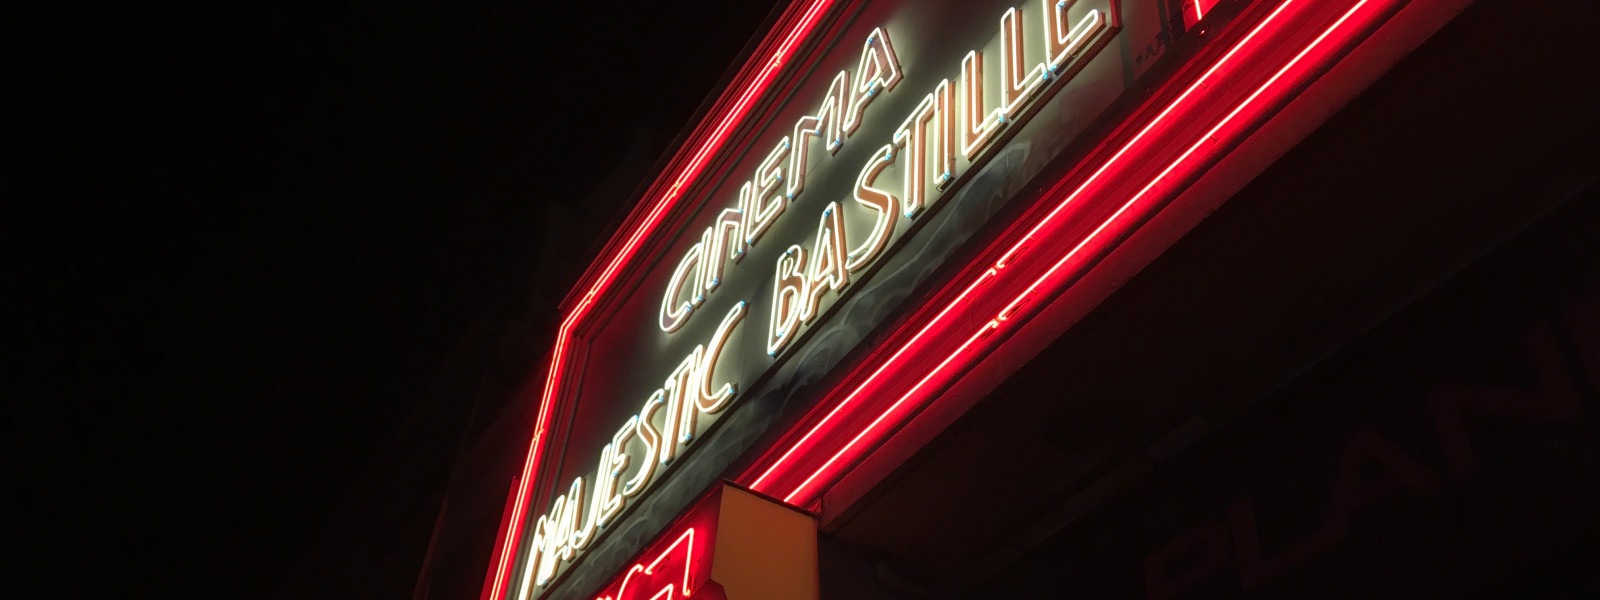 A neon sign for Cinema Majestic Bastille at night